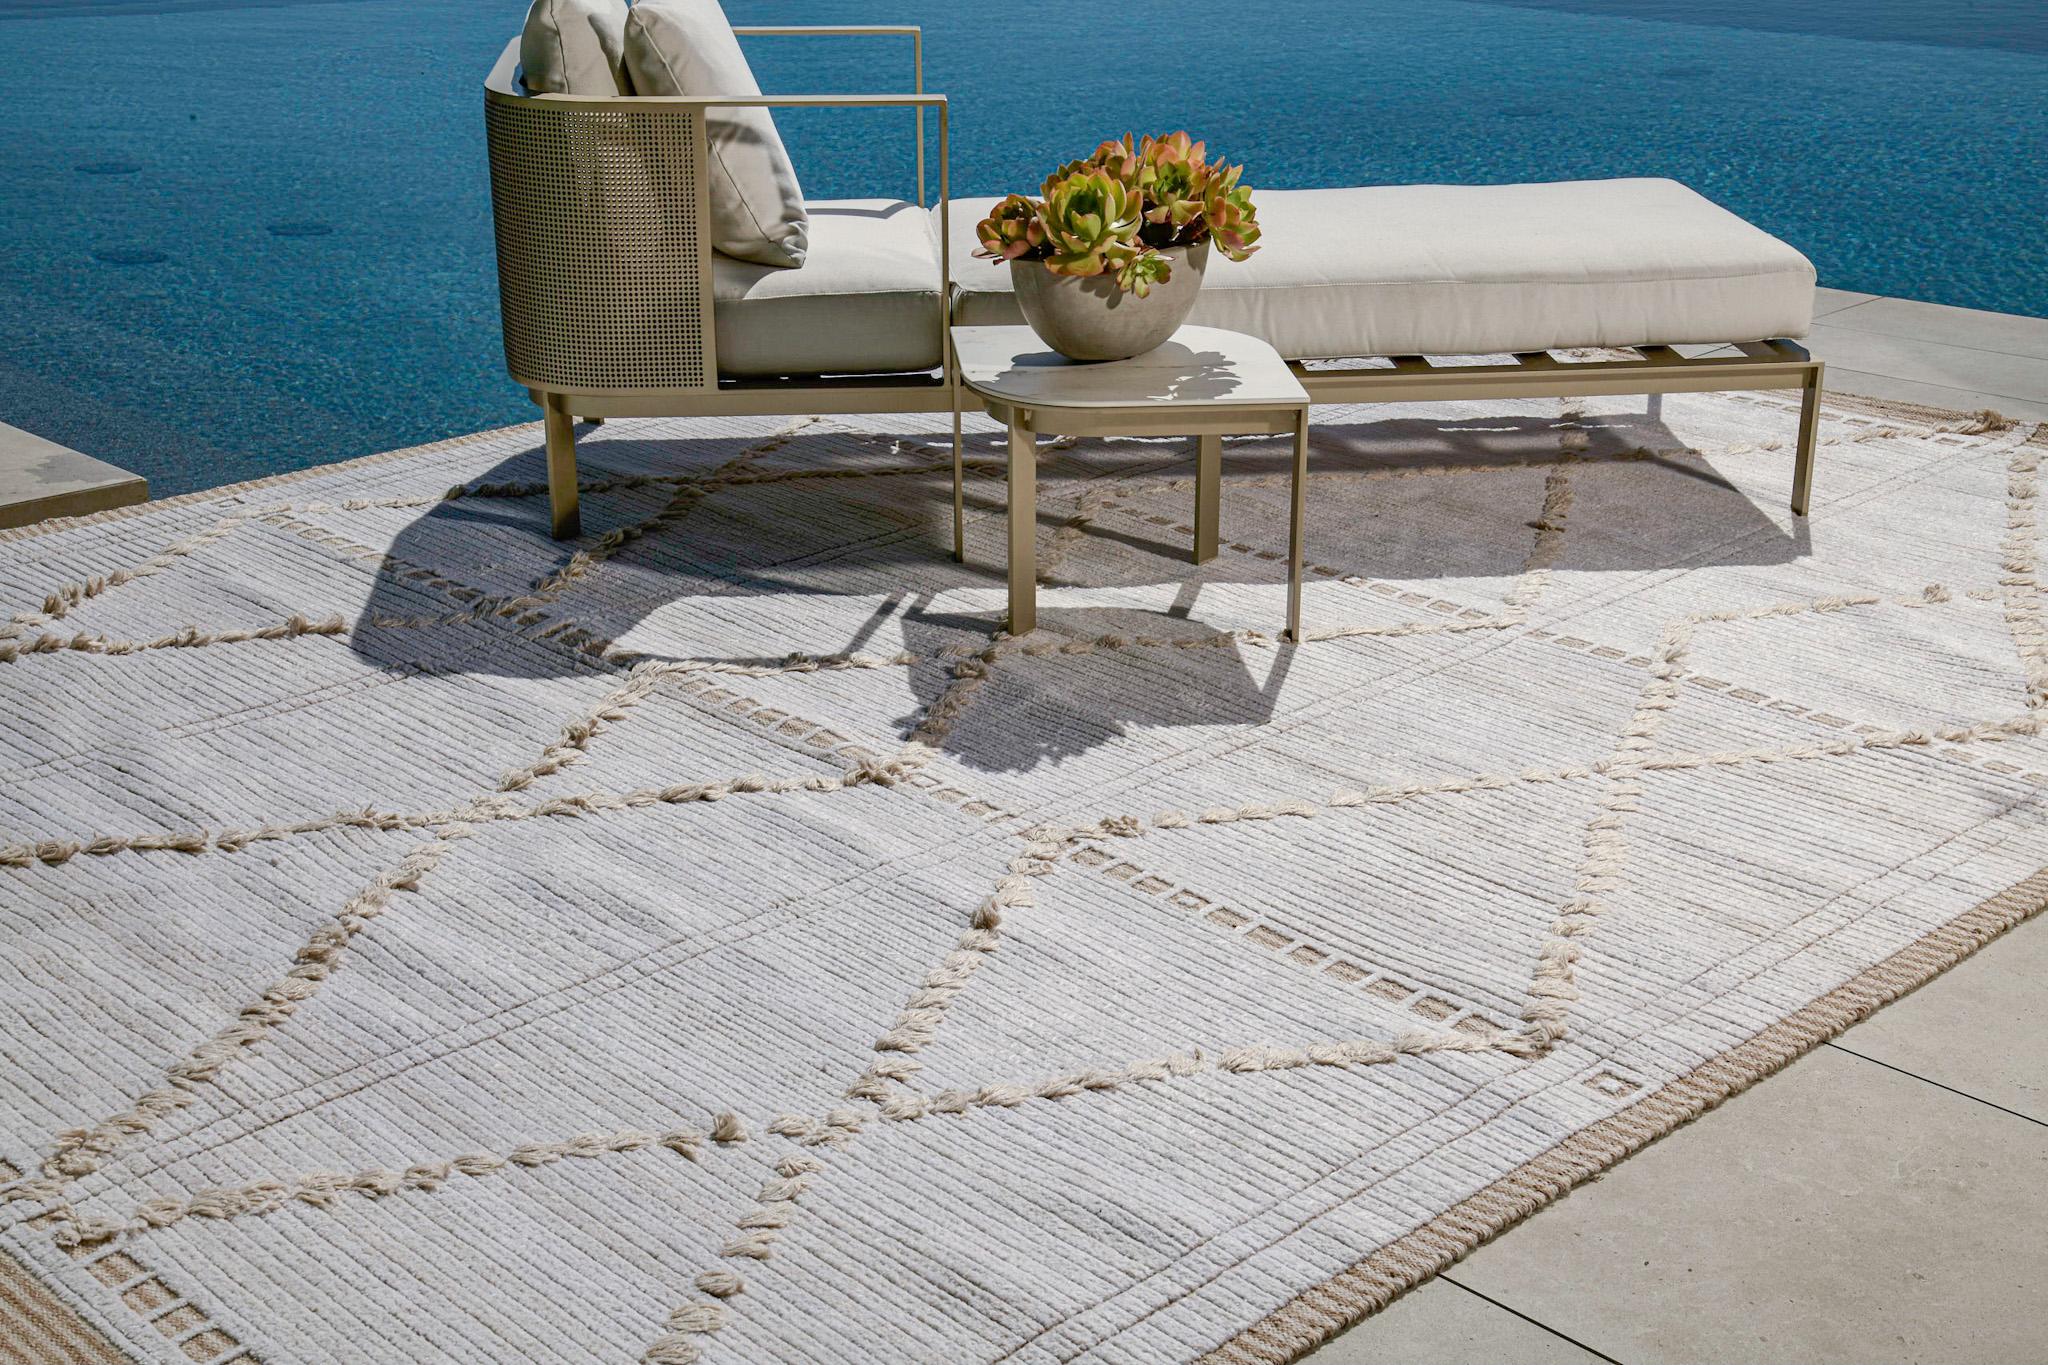 Enjoy the fresh air with Nasim, rugs that work indoors and out.

Rug Number
31435
Size
9' 1